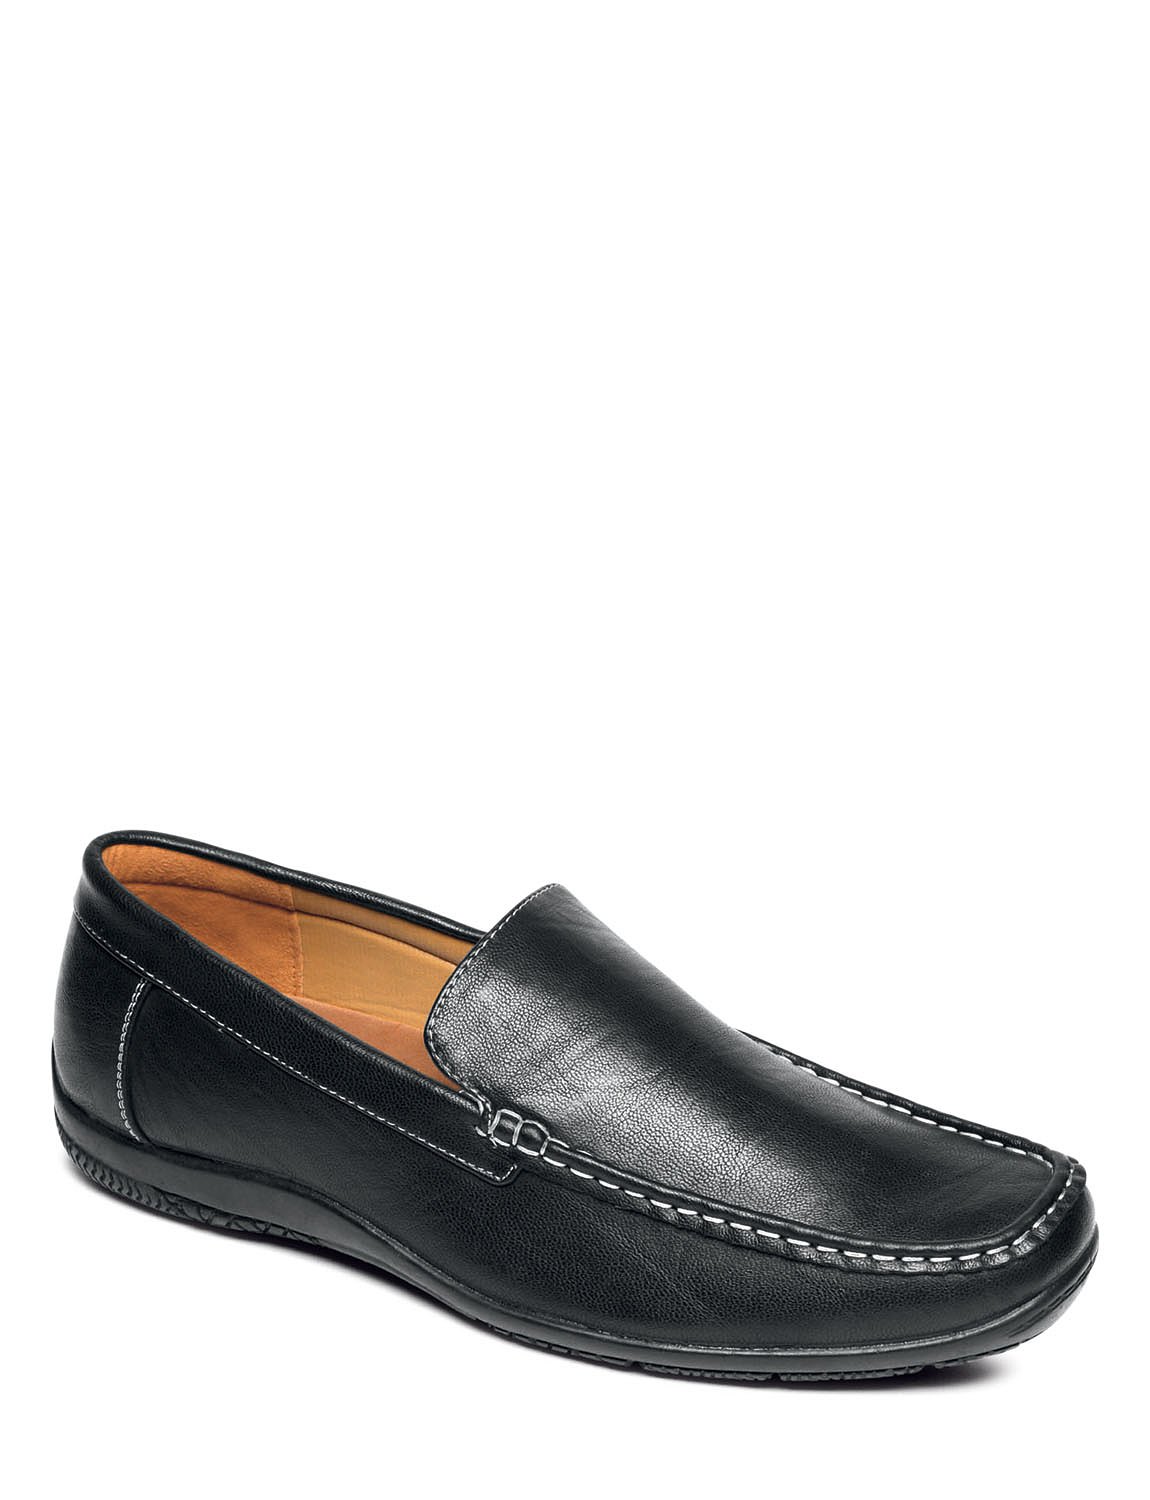 wide shoes for men